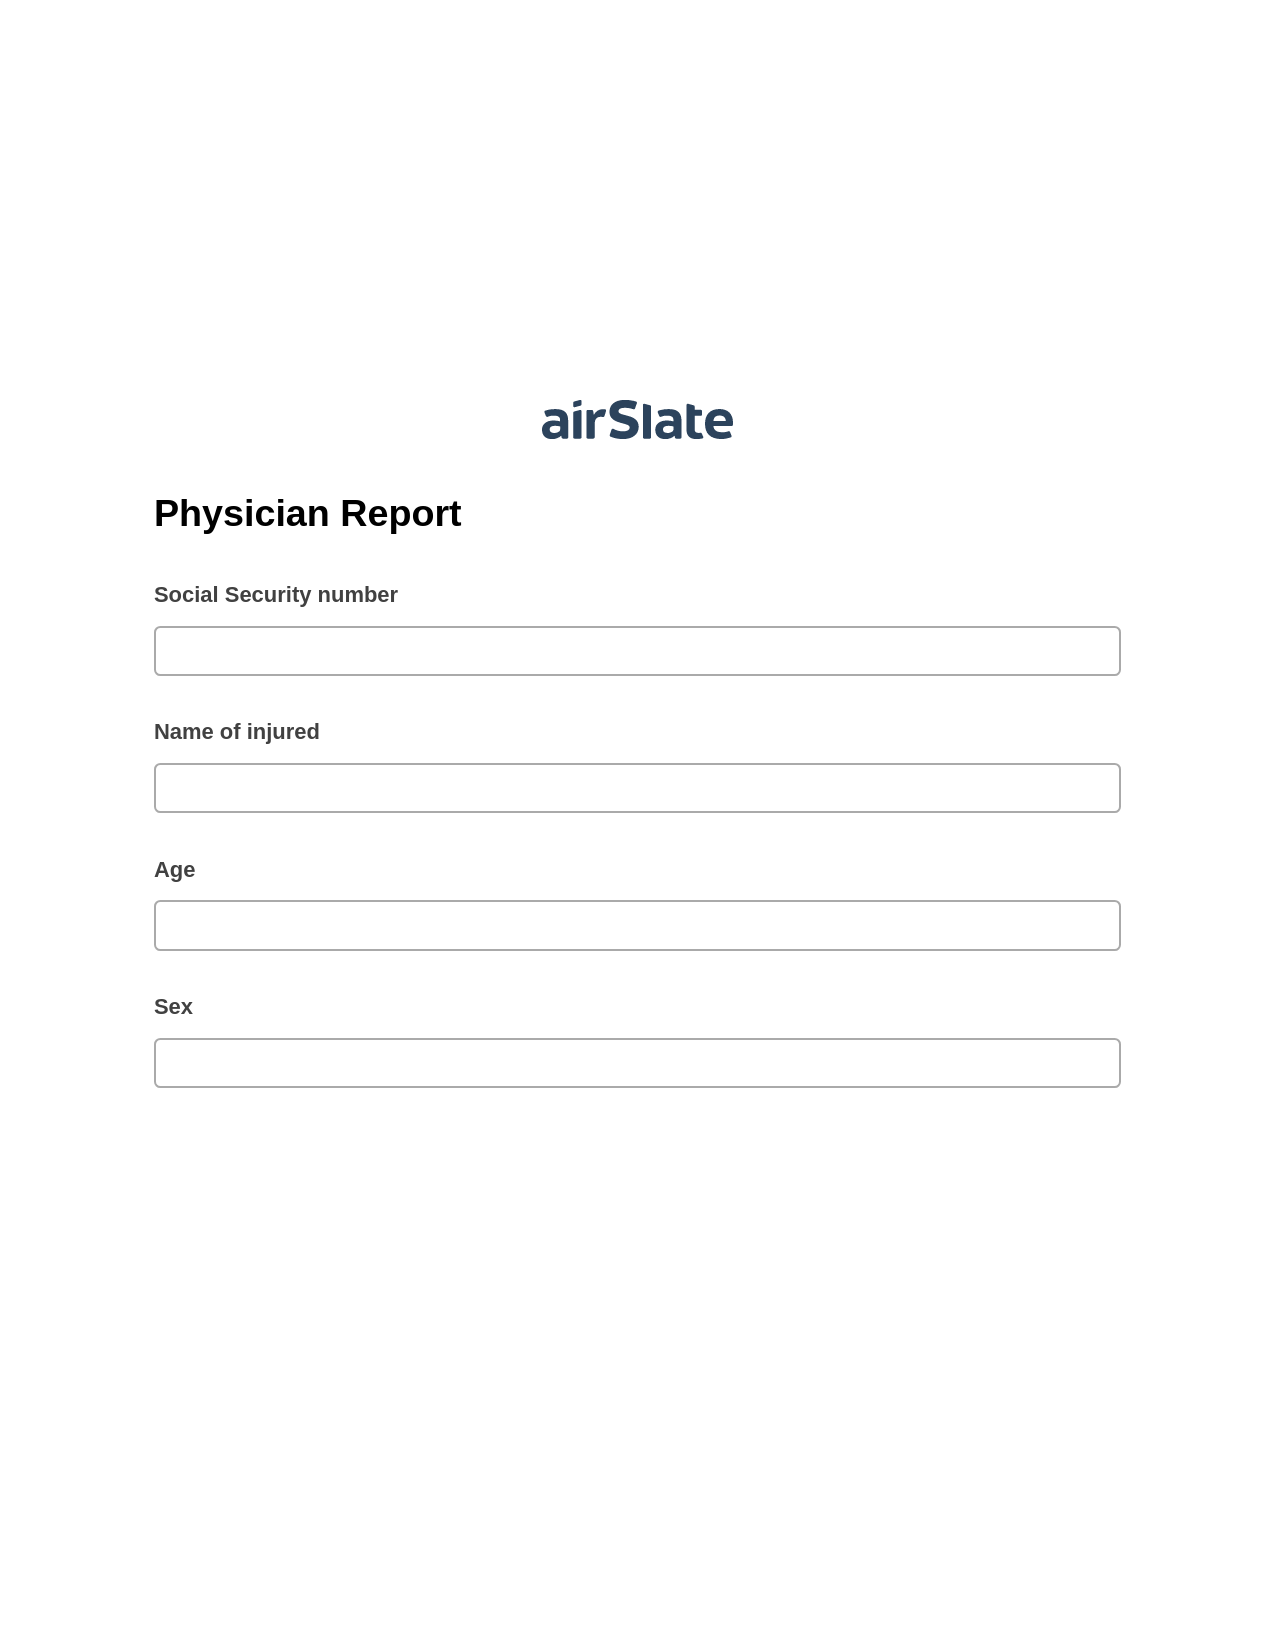 Physician Report Pre-fill from MS Dynamics 365 Records, Custom Field's Value Bot, Archive to SharePoint Folder Bot